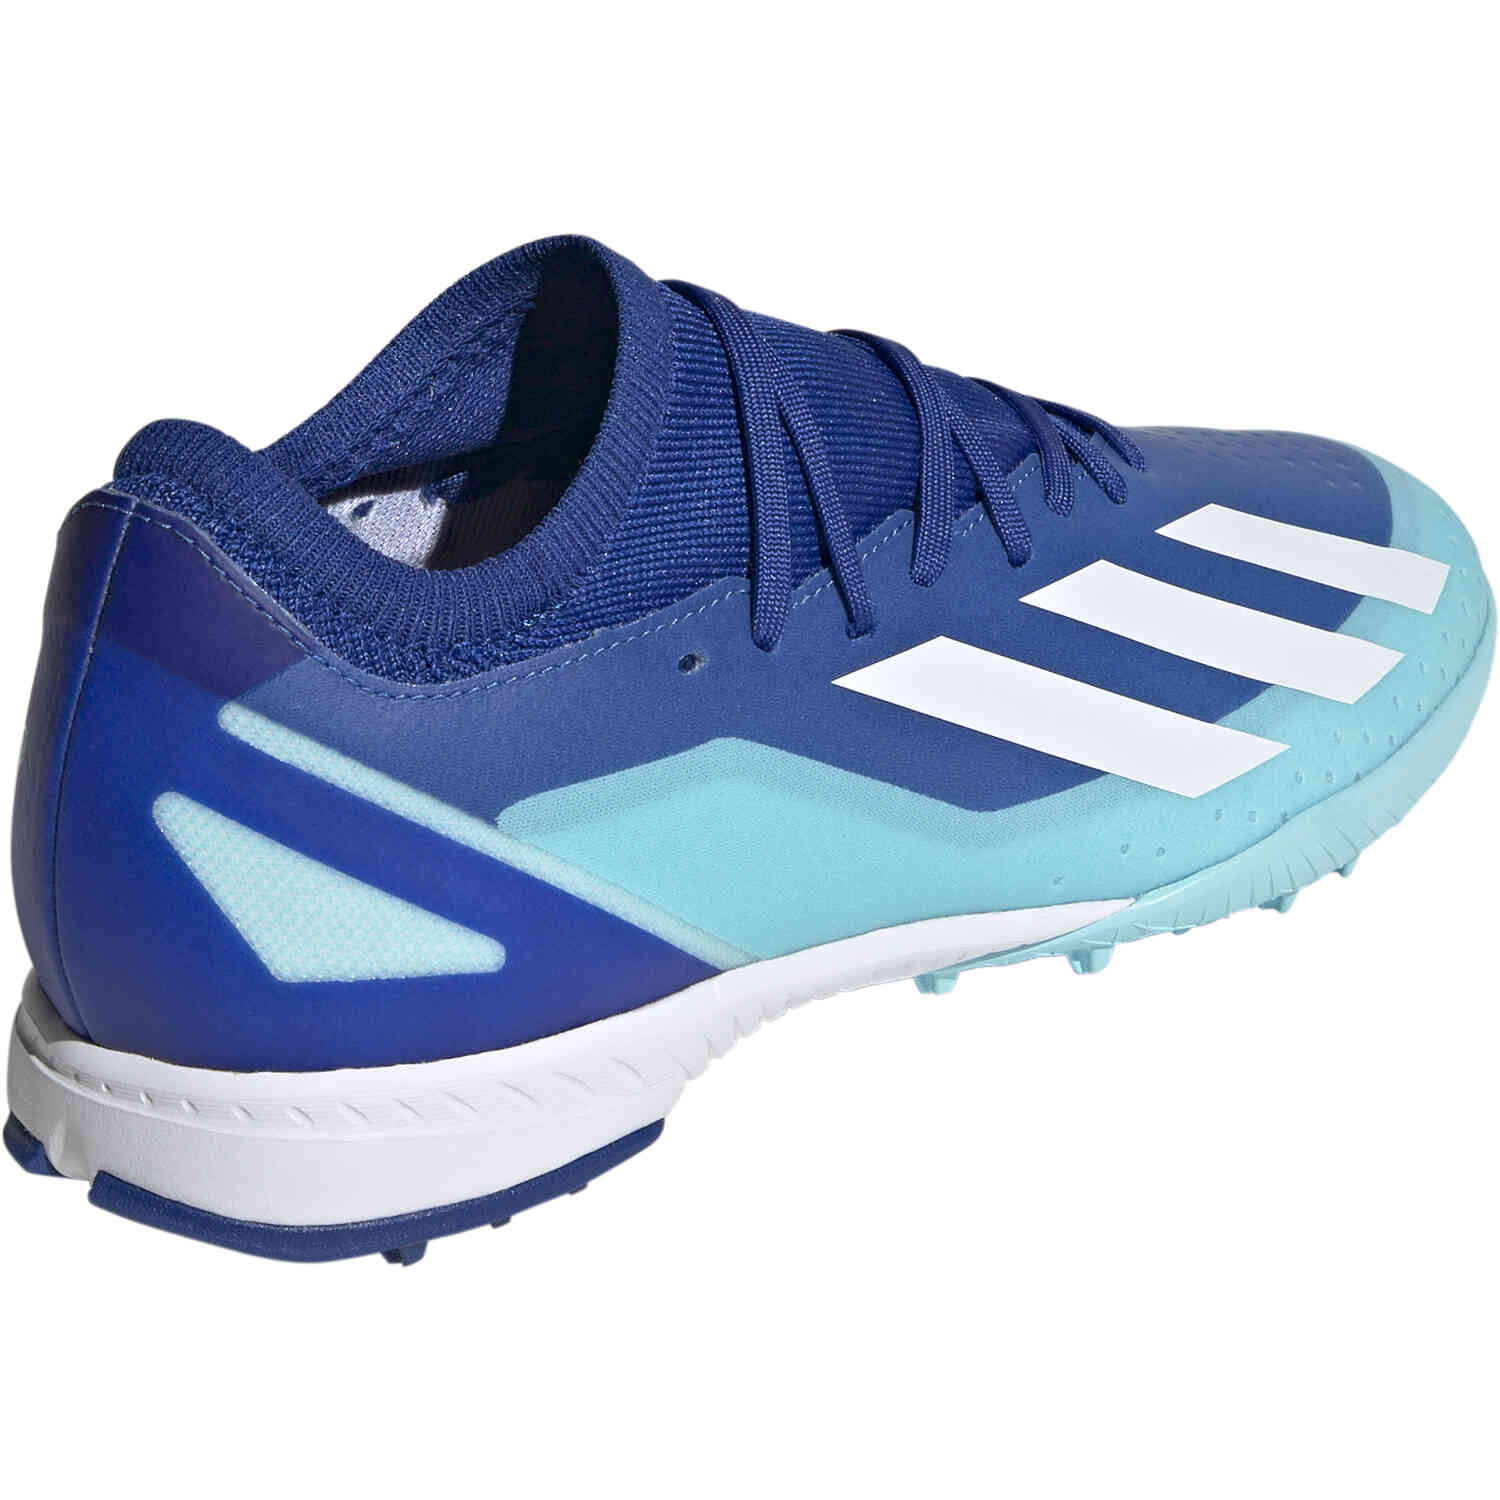 adidas X Crazyfast.3 TF Turf Soccer Shoes - Bright Royal, White & Solar Red  - Soccer Master